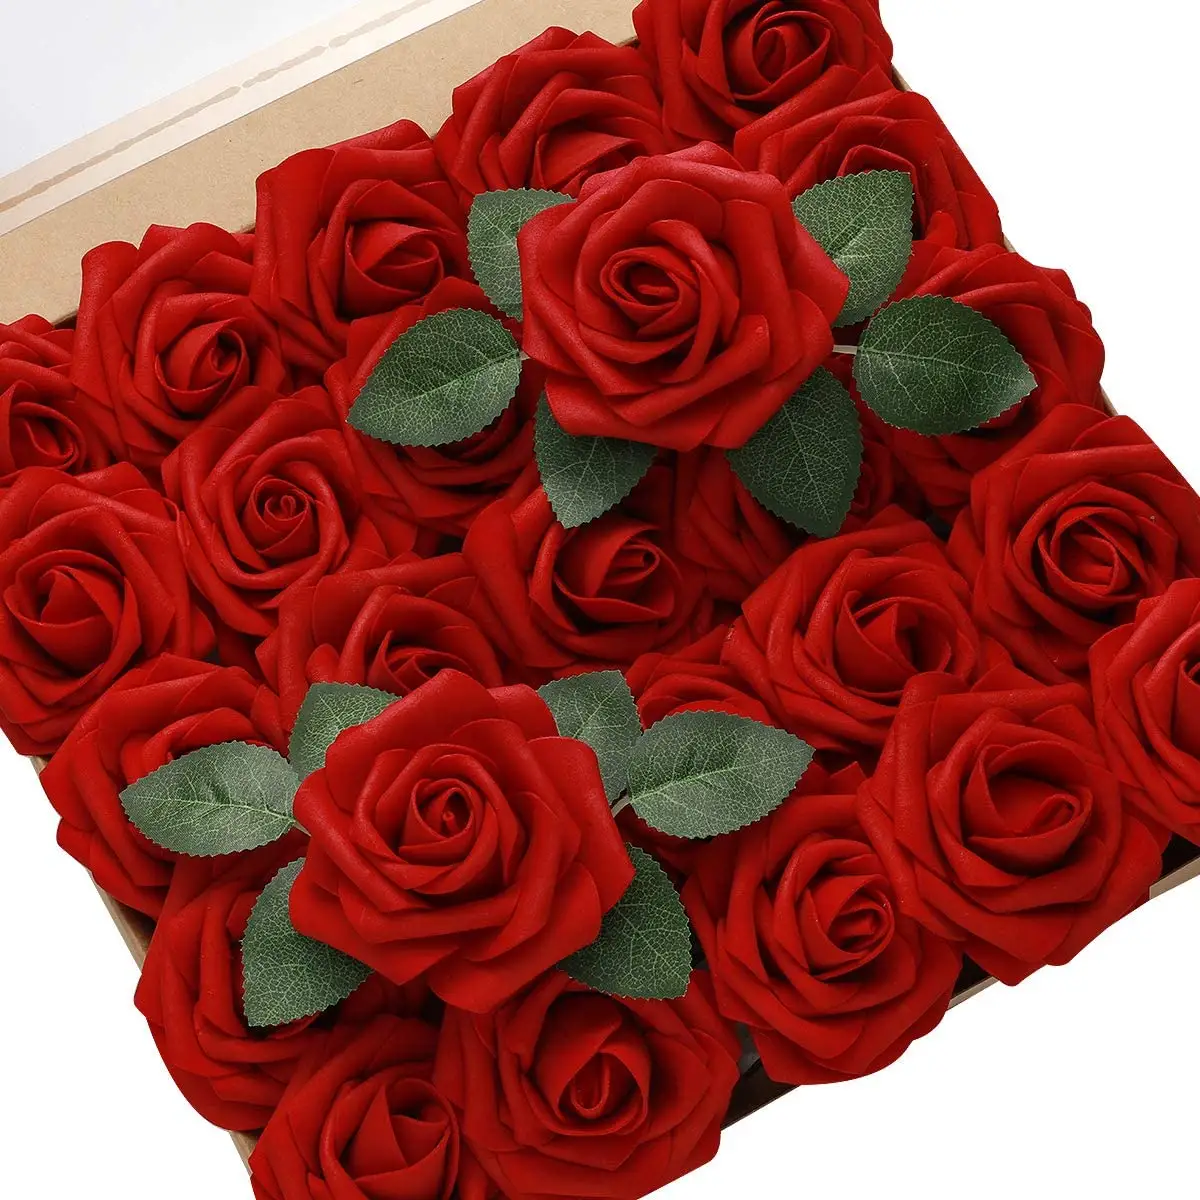 Best Price 25pcs Artificial Foam Flower Roses Soap Rose Artificial Pe Foam Roses with Stem Box for Wedding DIY Valentines Day